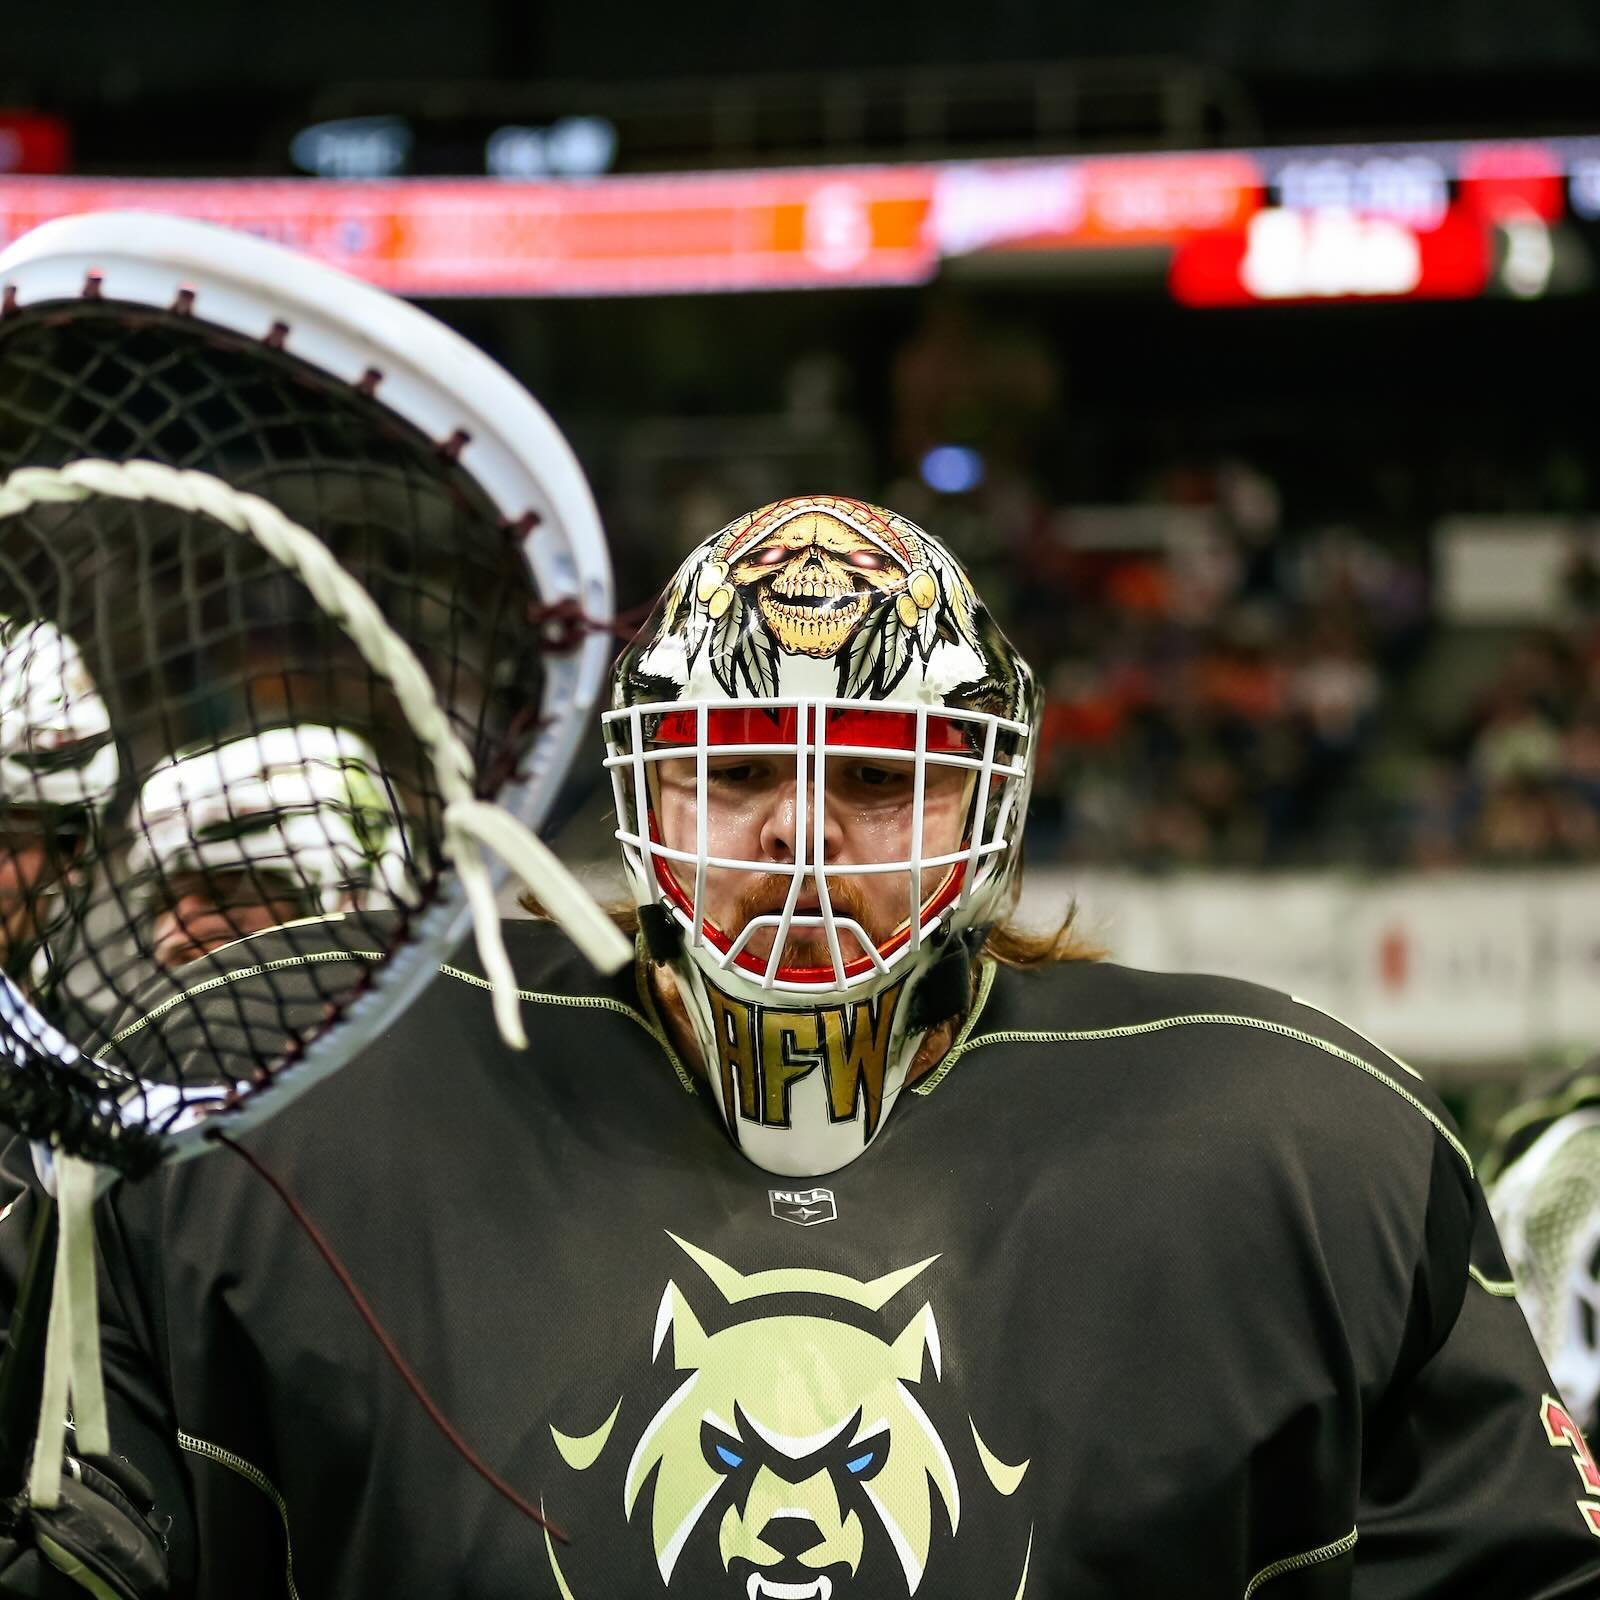 Can the Albany FireWolves become just the third team in NLL history to come back after losing Game 1 of the NLL Finals?
&nbsp;
Only the 2014 Rochester Knighthawks and 2022 Colorado Mammoth have come back to win the Cup after losing Game 1 of the NLL 